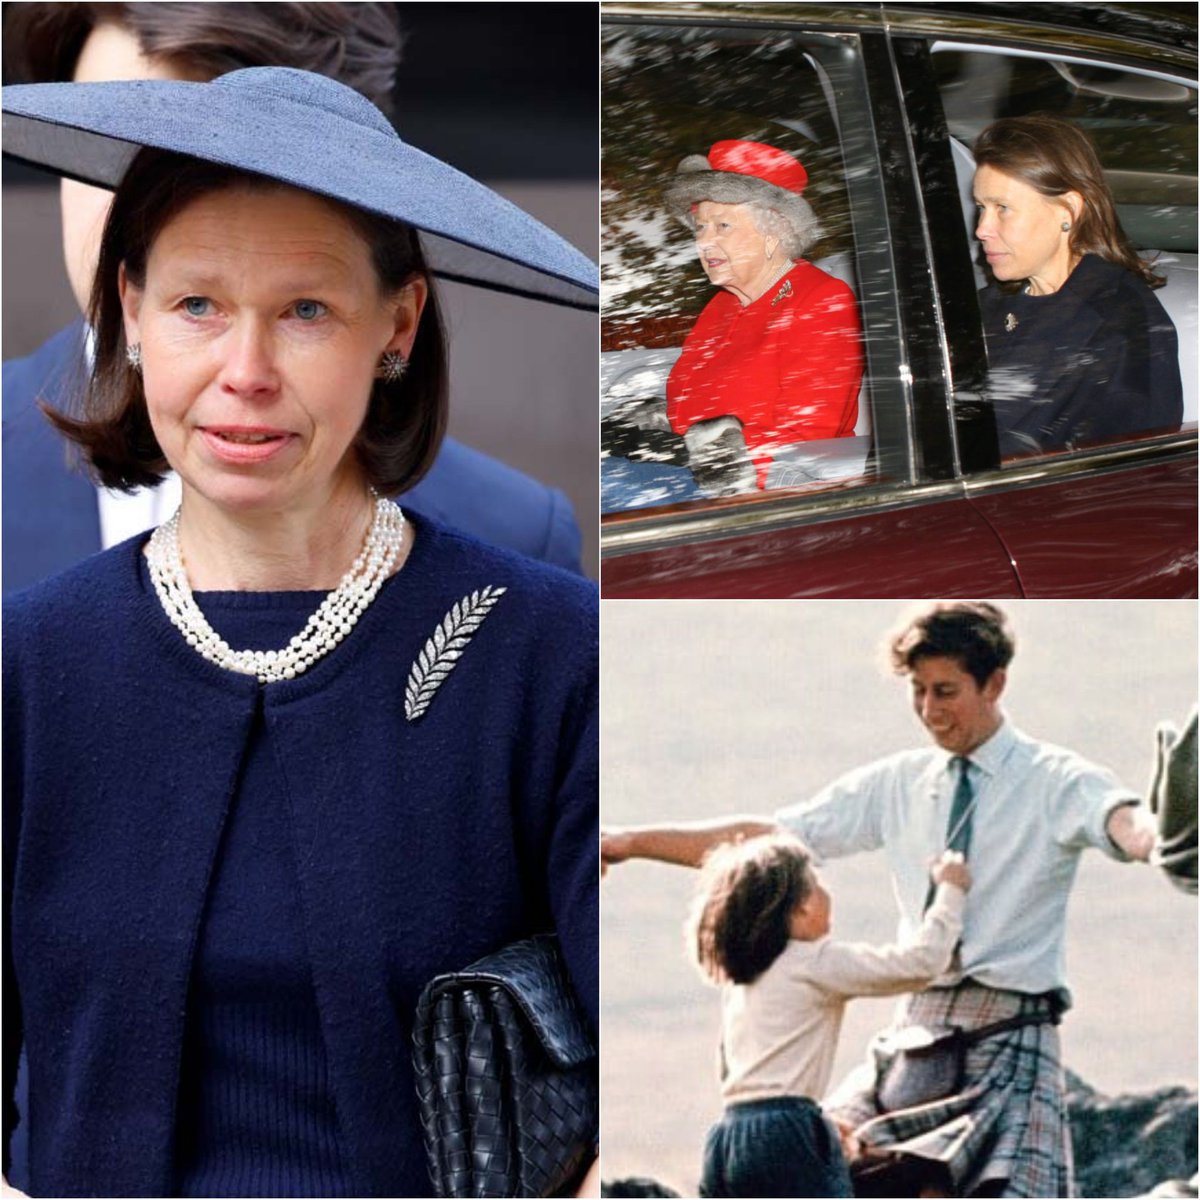 A blessed 6️⃣0️⃣th birthday 🎂🎈 to this member of the royal family, LADY SARAH CHATTO

-daughter of Princess Margaret
-the only niece of the late QEII
-the 1st cousin of King Charles

We always see her and her family during public and private #RoyalFamily events.